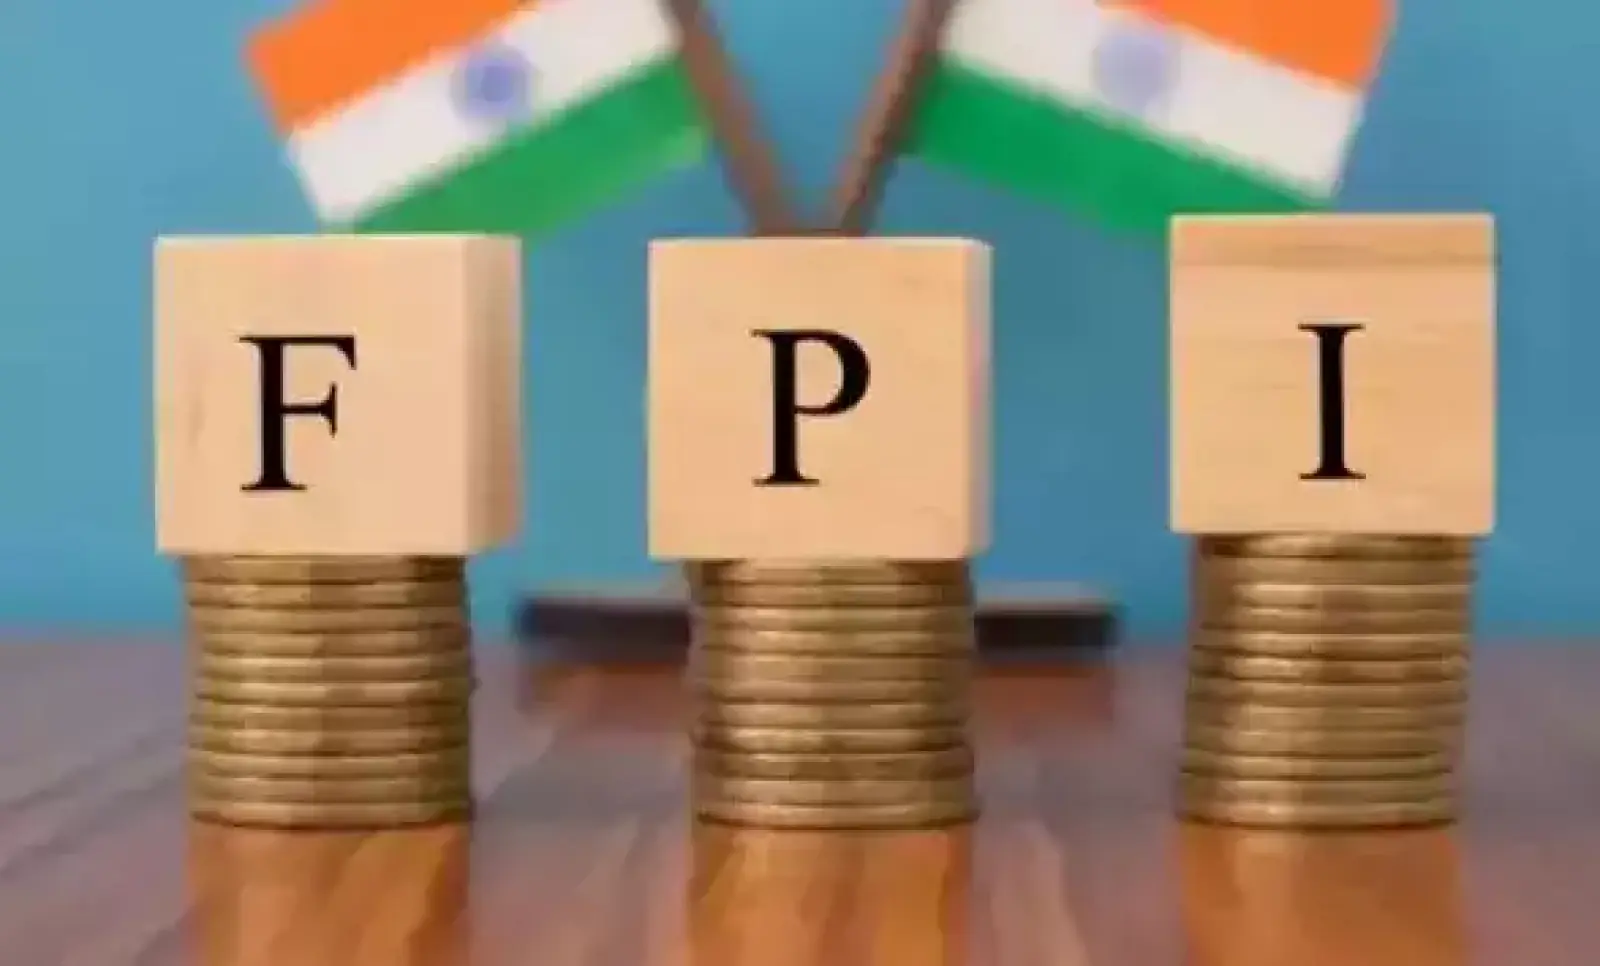 FPI Data: FPI stopped selling in November, bought shares worth Rs 9000 crore so far